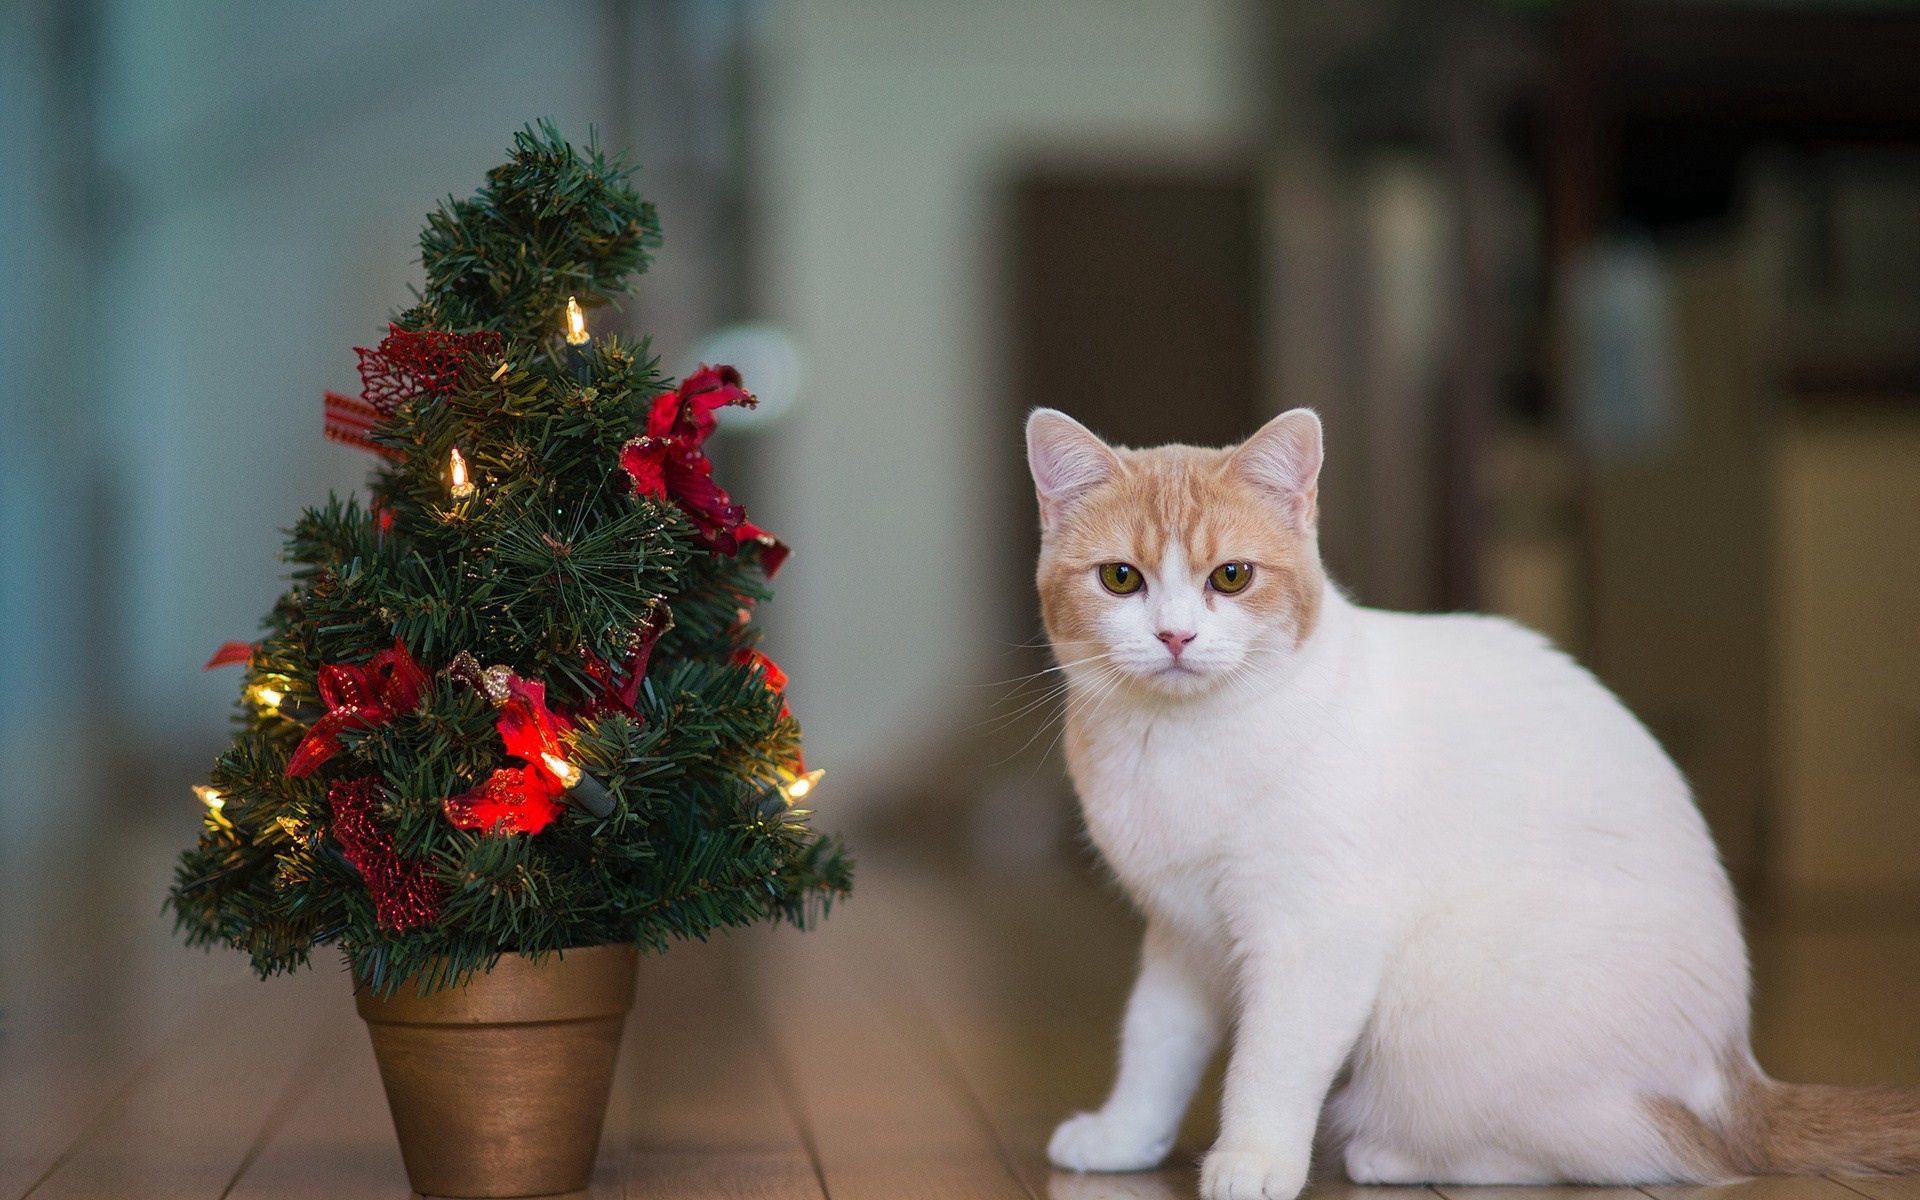 animals, new year, cat, christmas tree, home, domestic